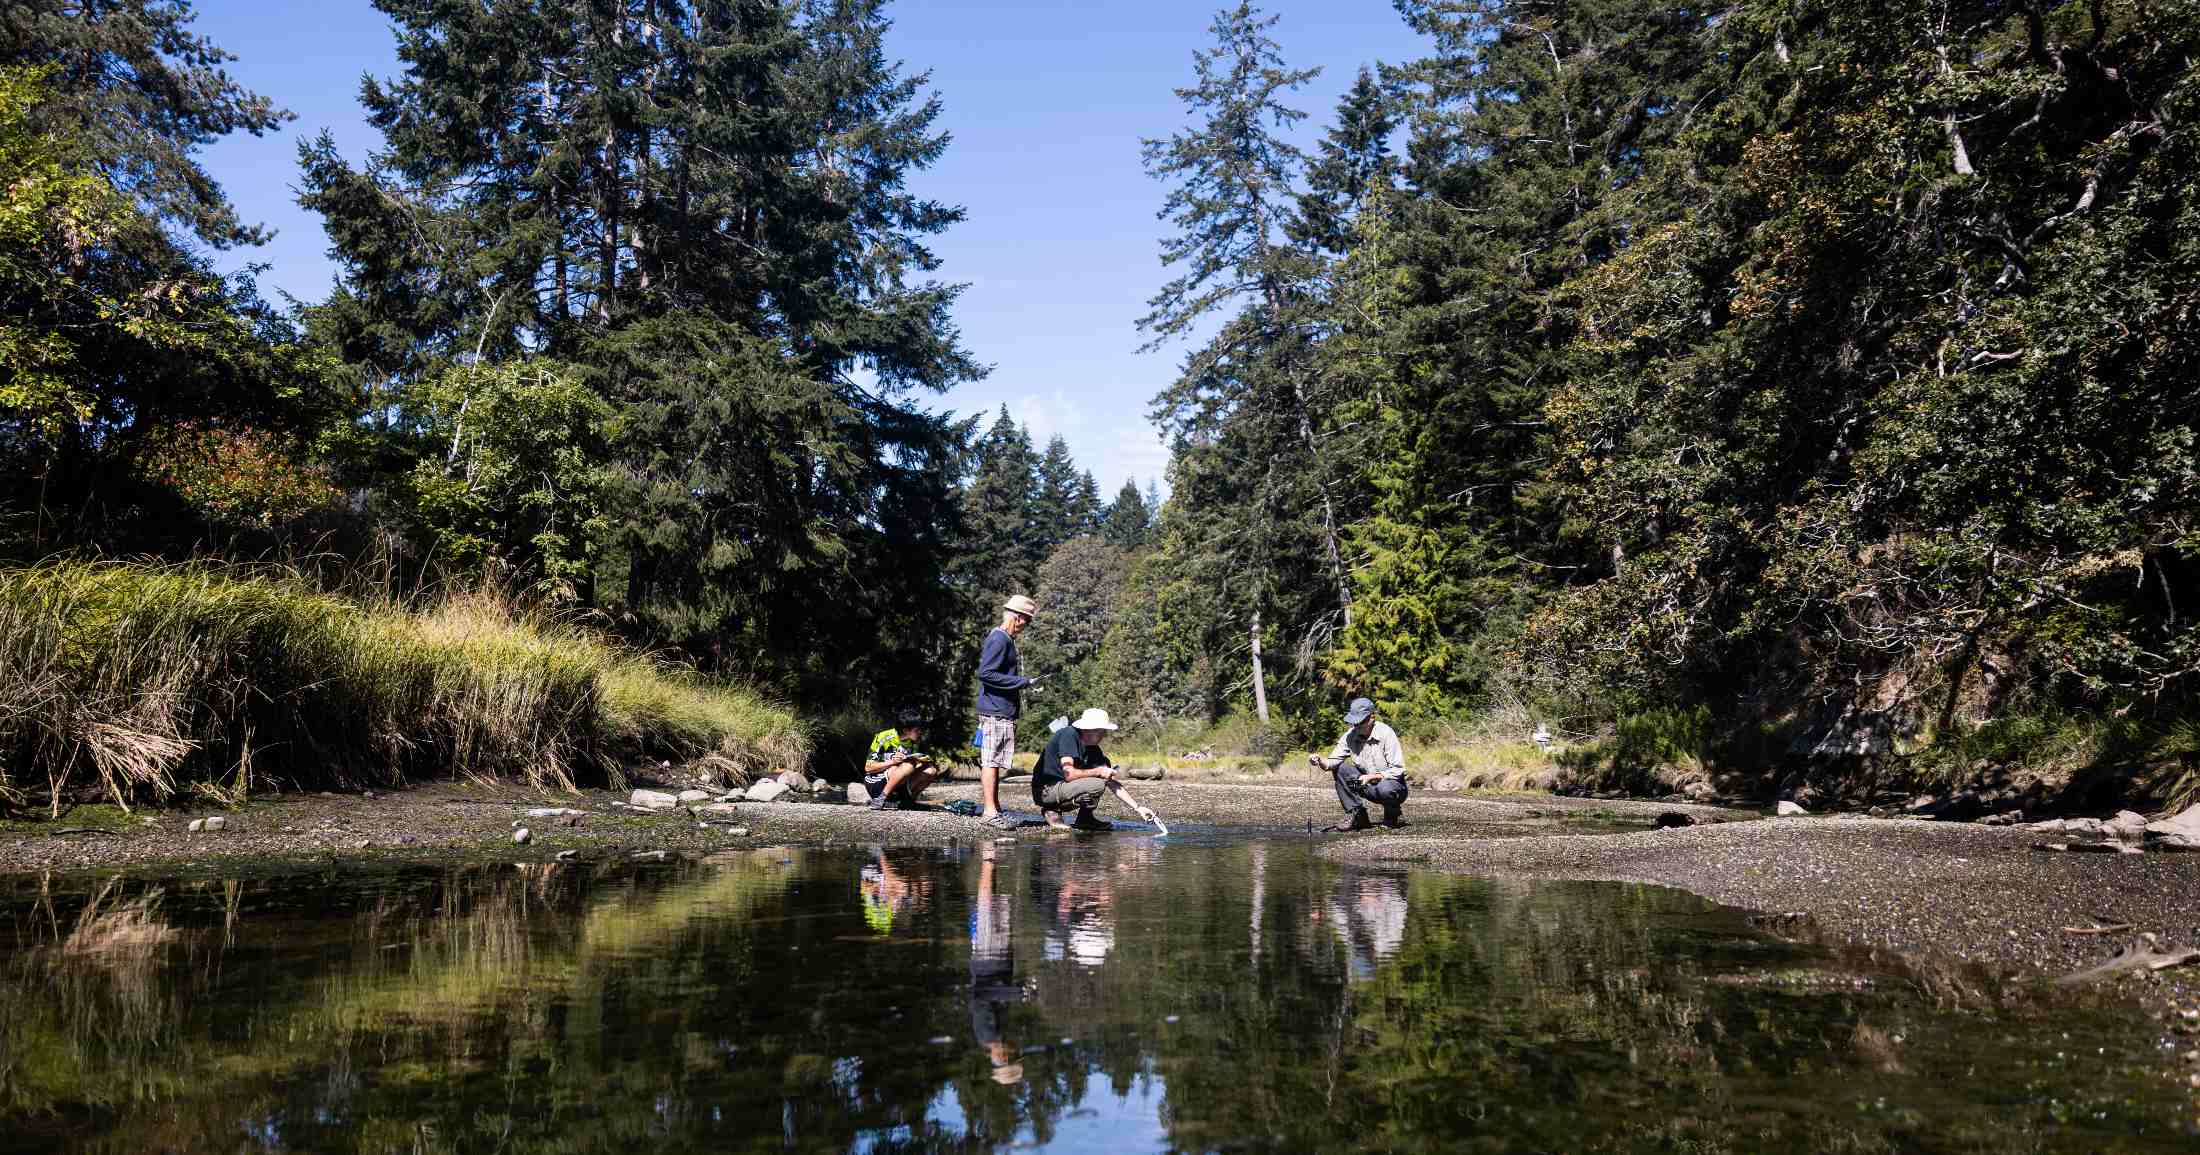 Four people working to collect a water sample along a river.